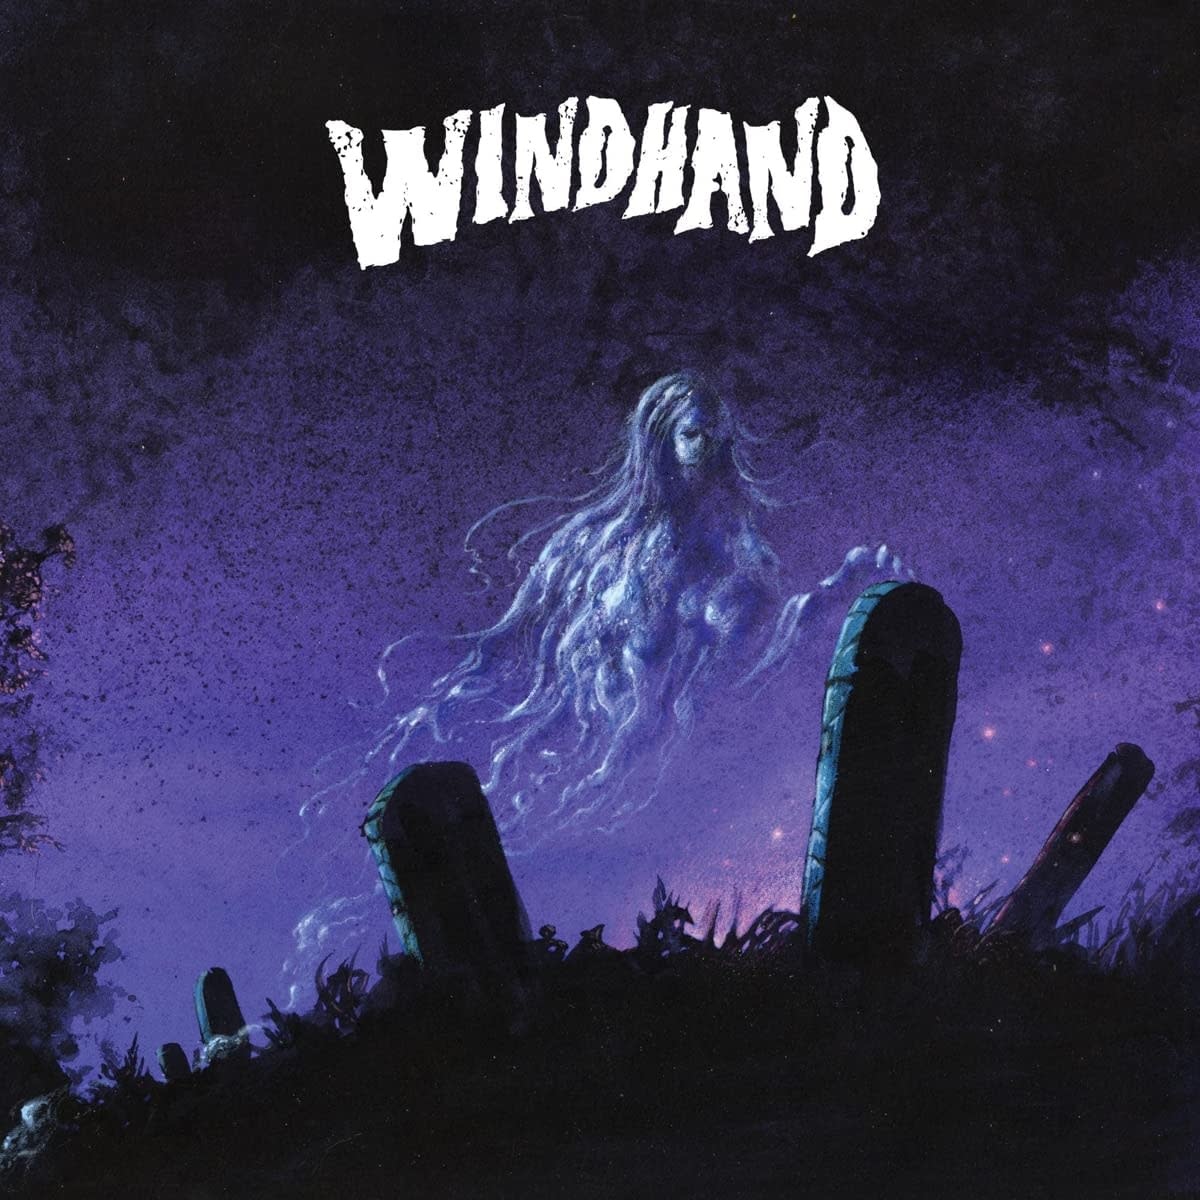 Windhand – Windhand